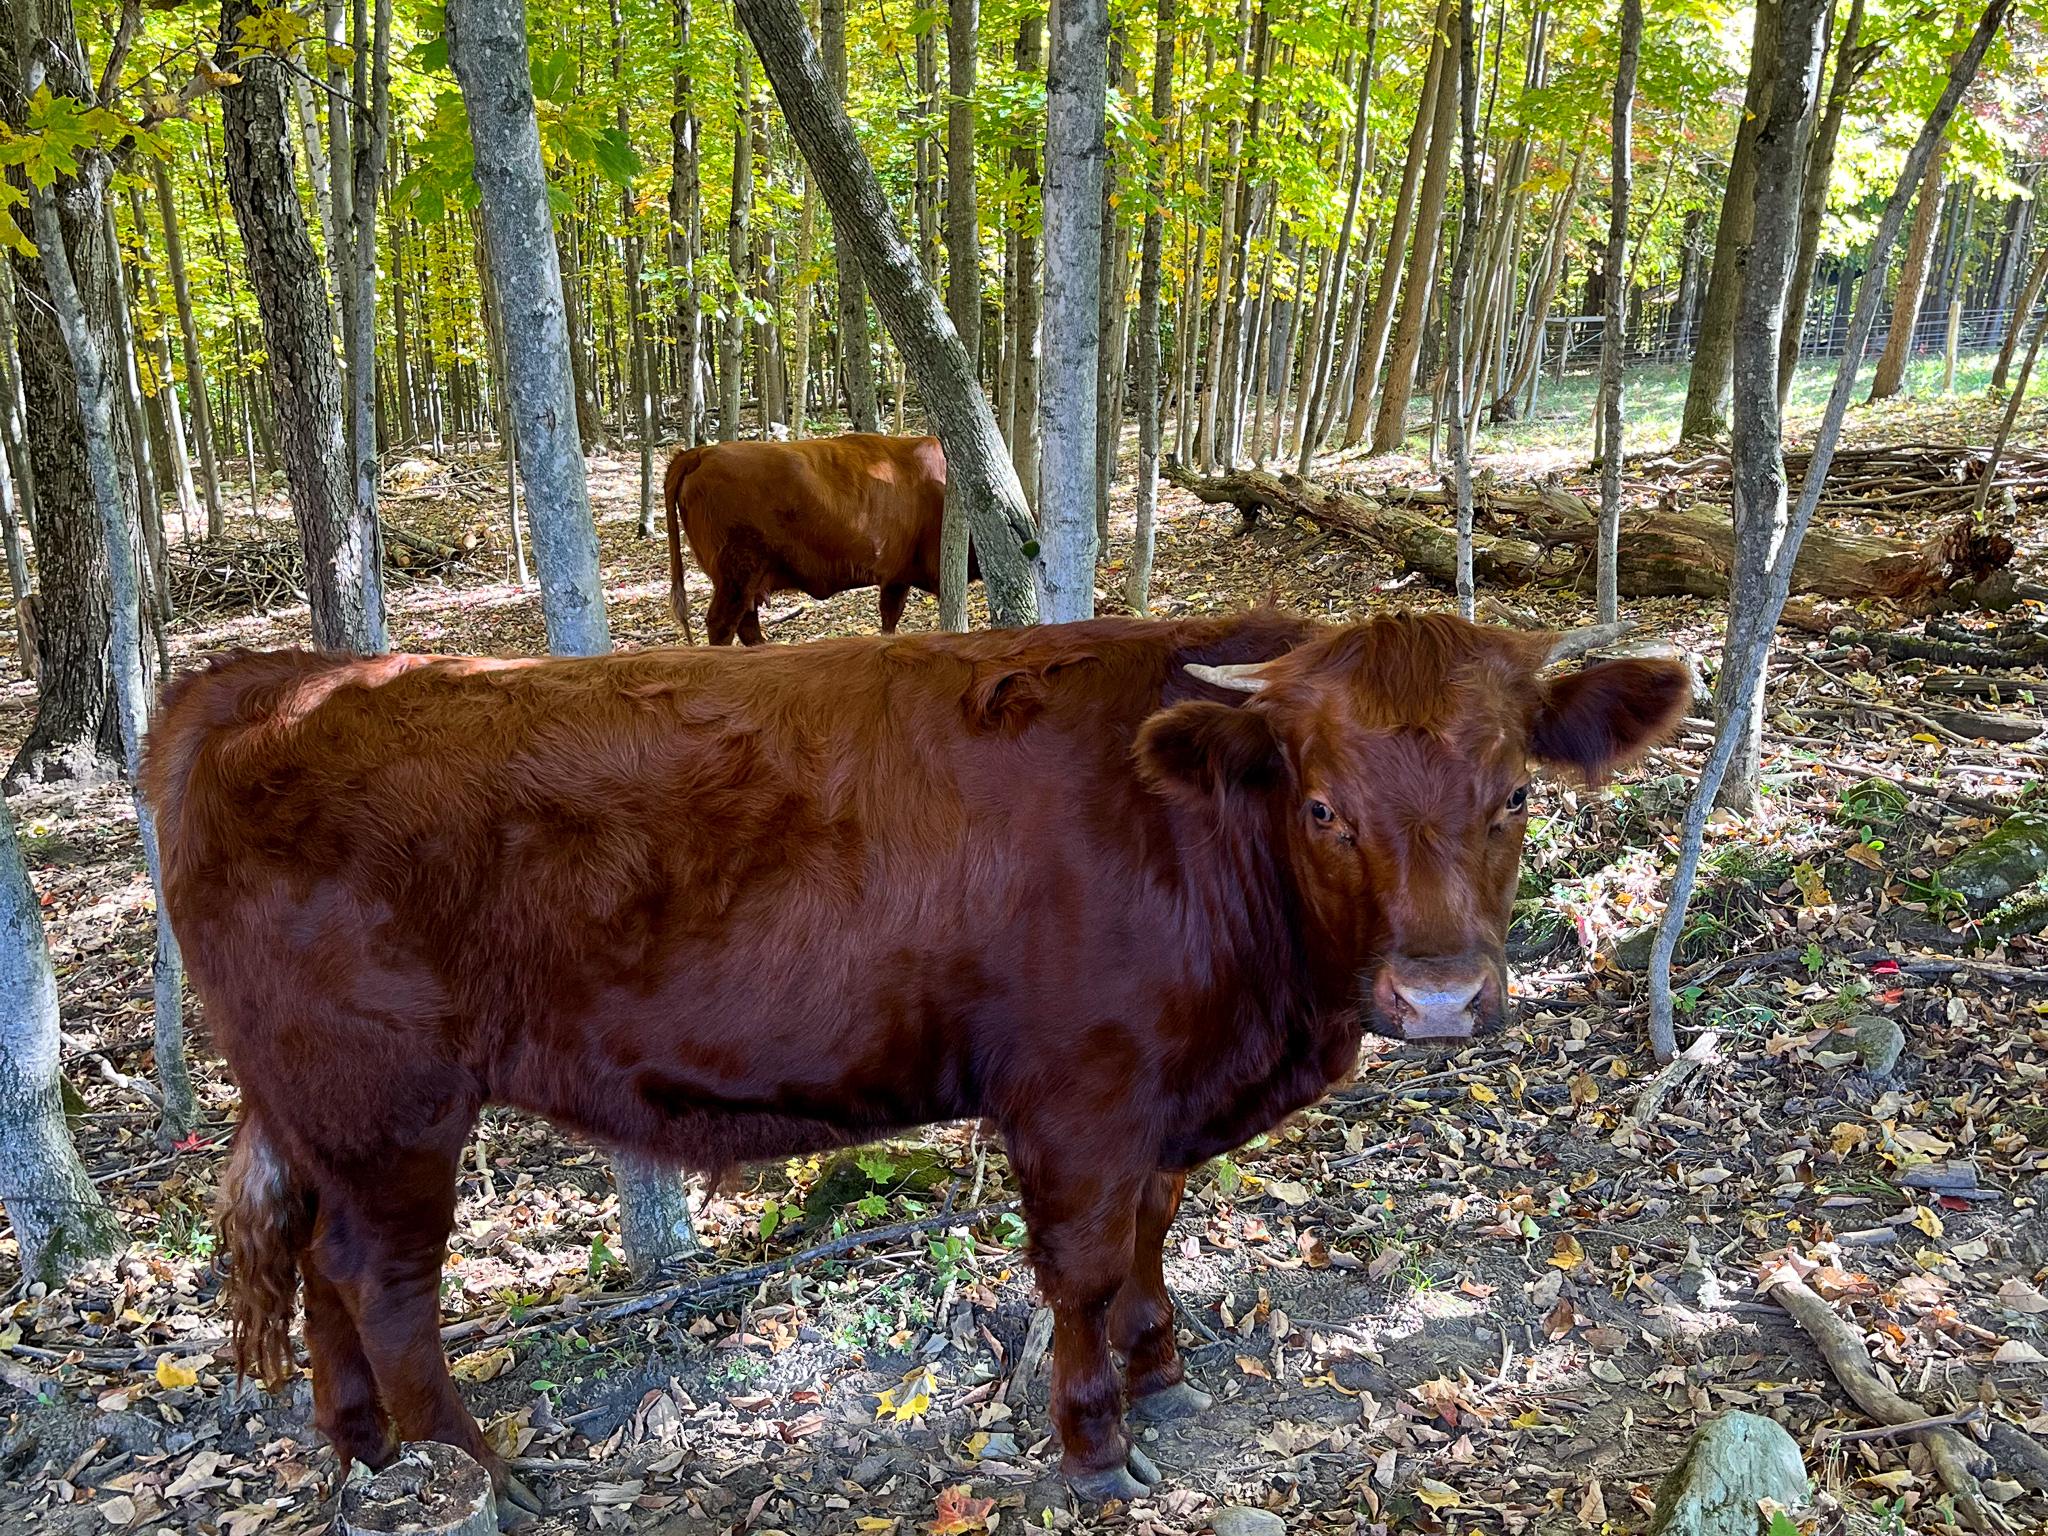 Cows grazing in a forest